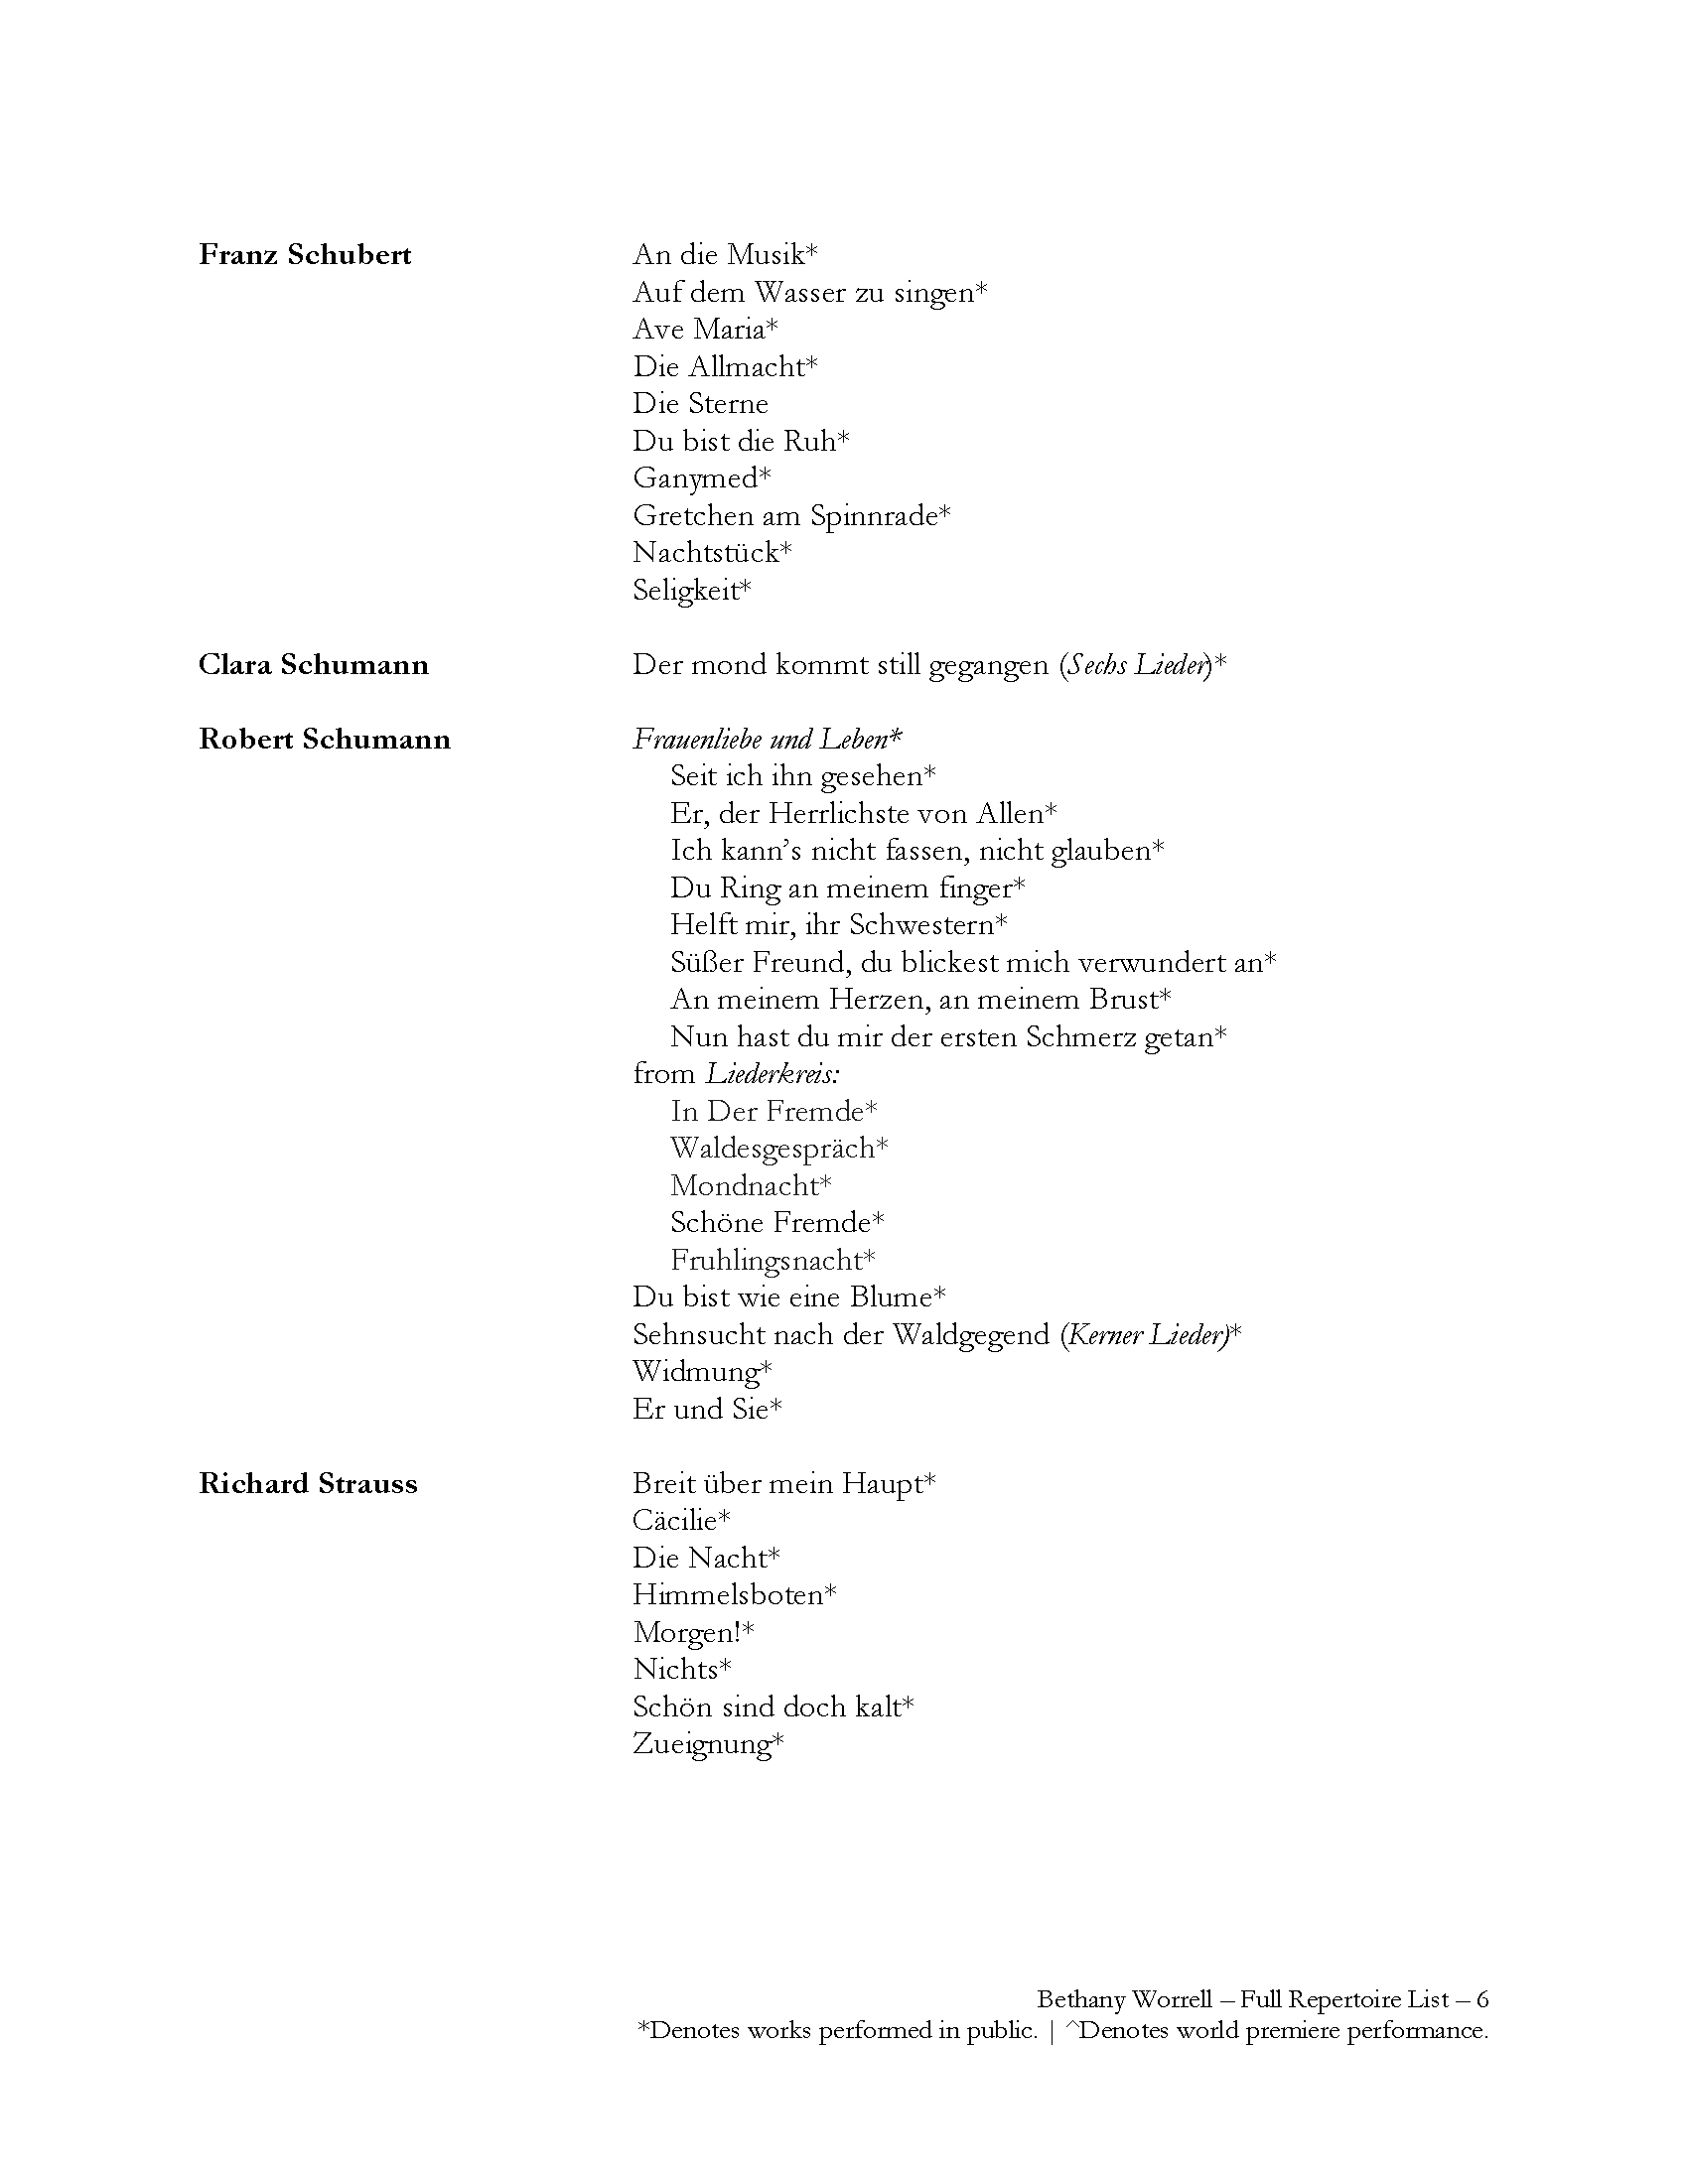 2020_0114_Repertoire List_Worrell_Web_Page_06.png